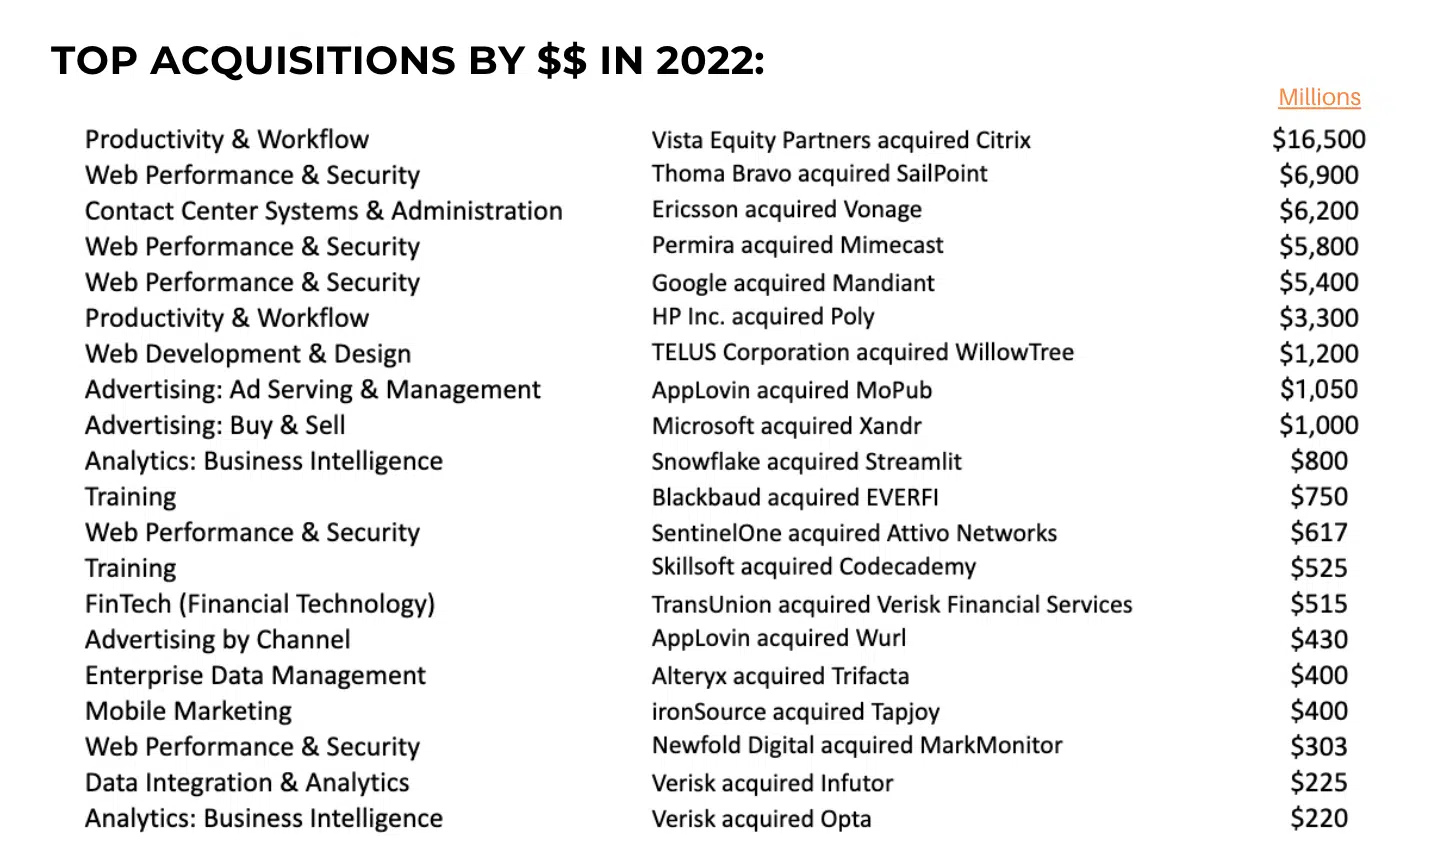 Top acquisitions by dollars in 2022